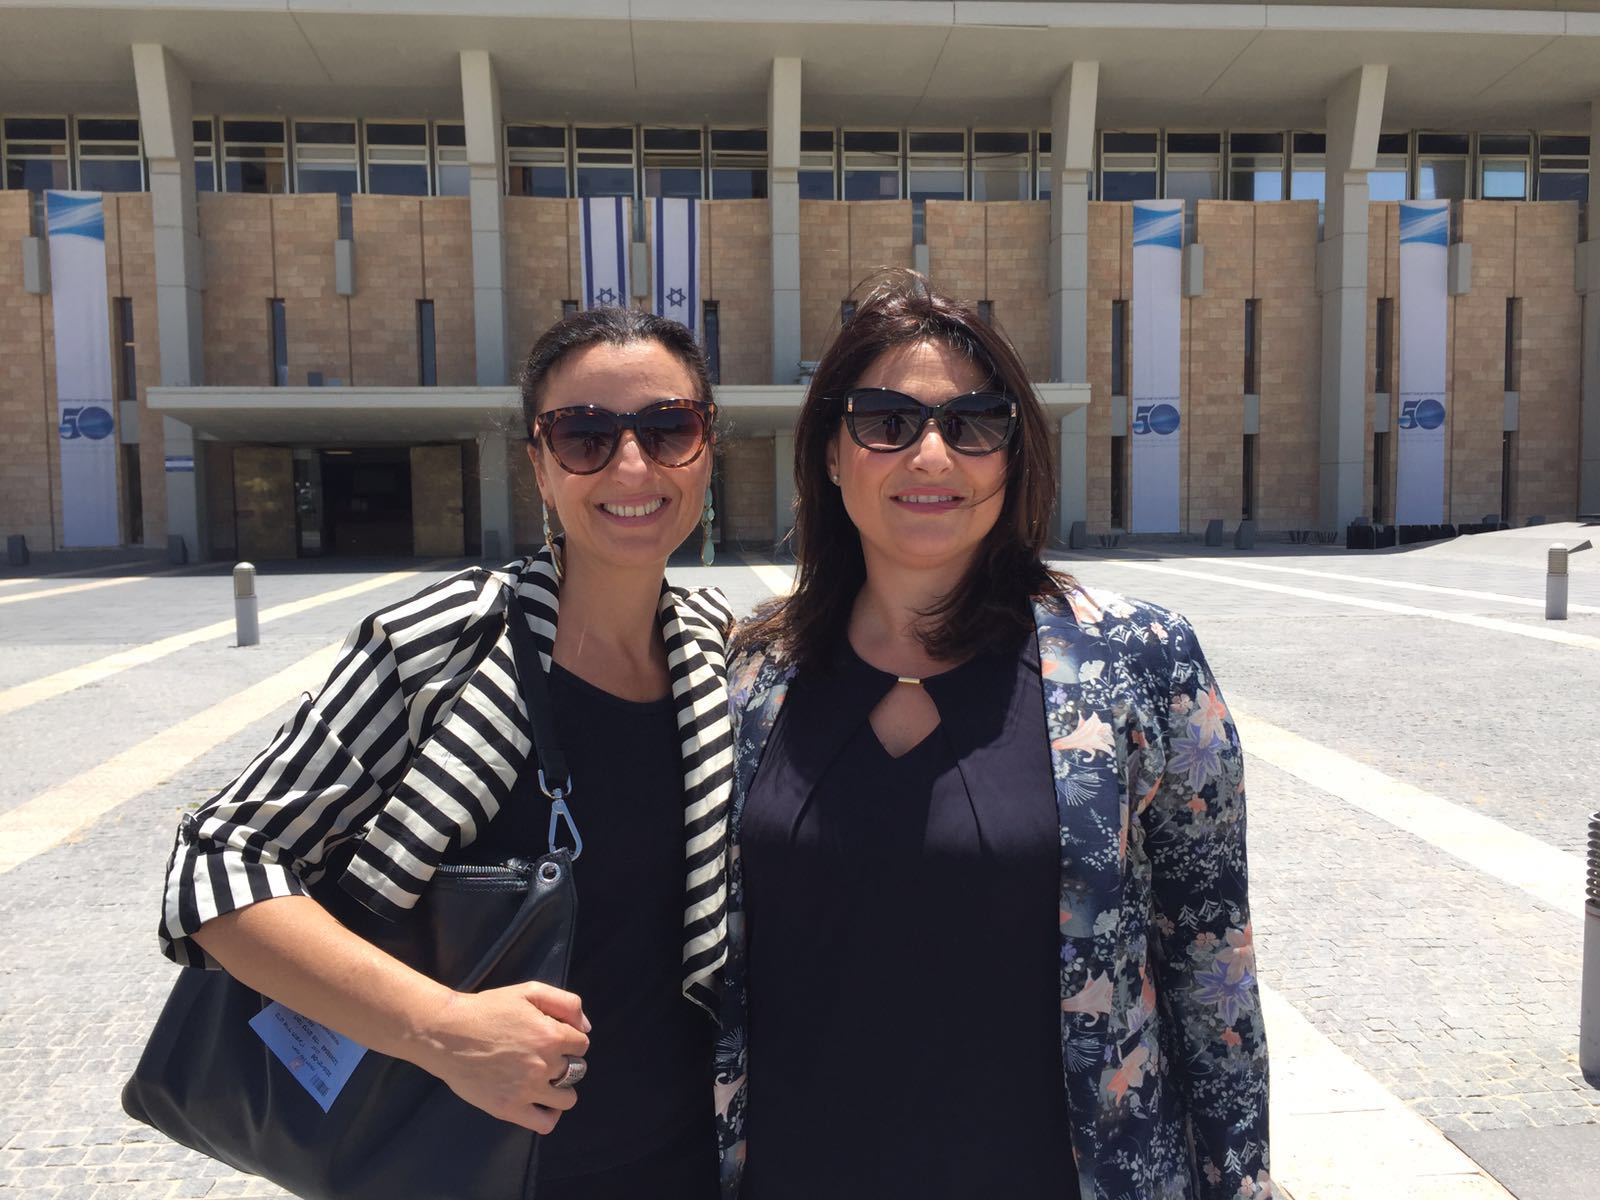 Minister Sacramento with Ms Hassan Nahoum at the Knesset